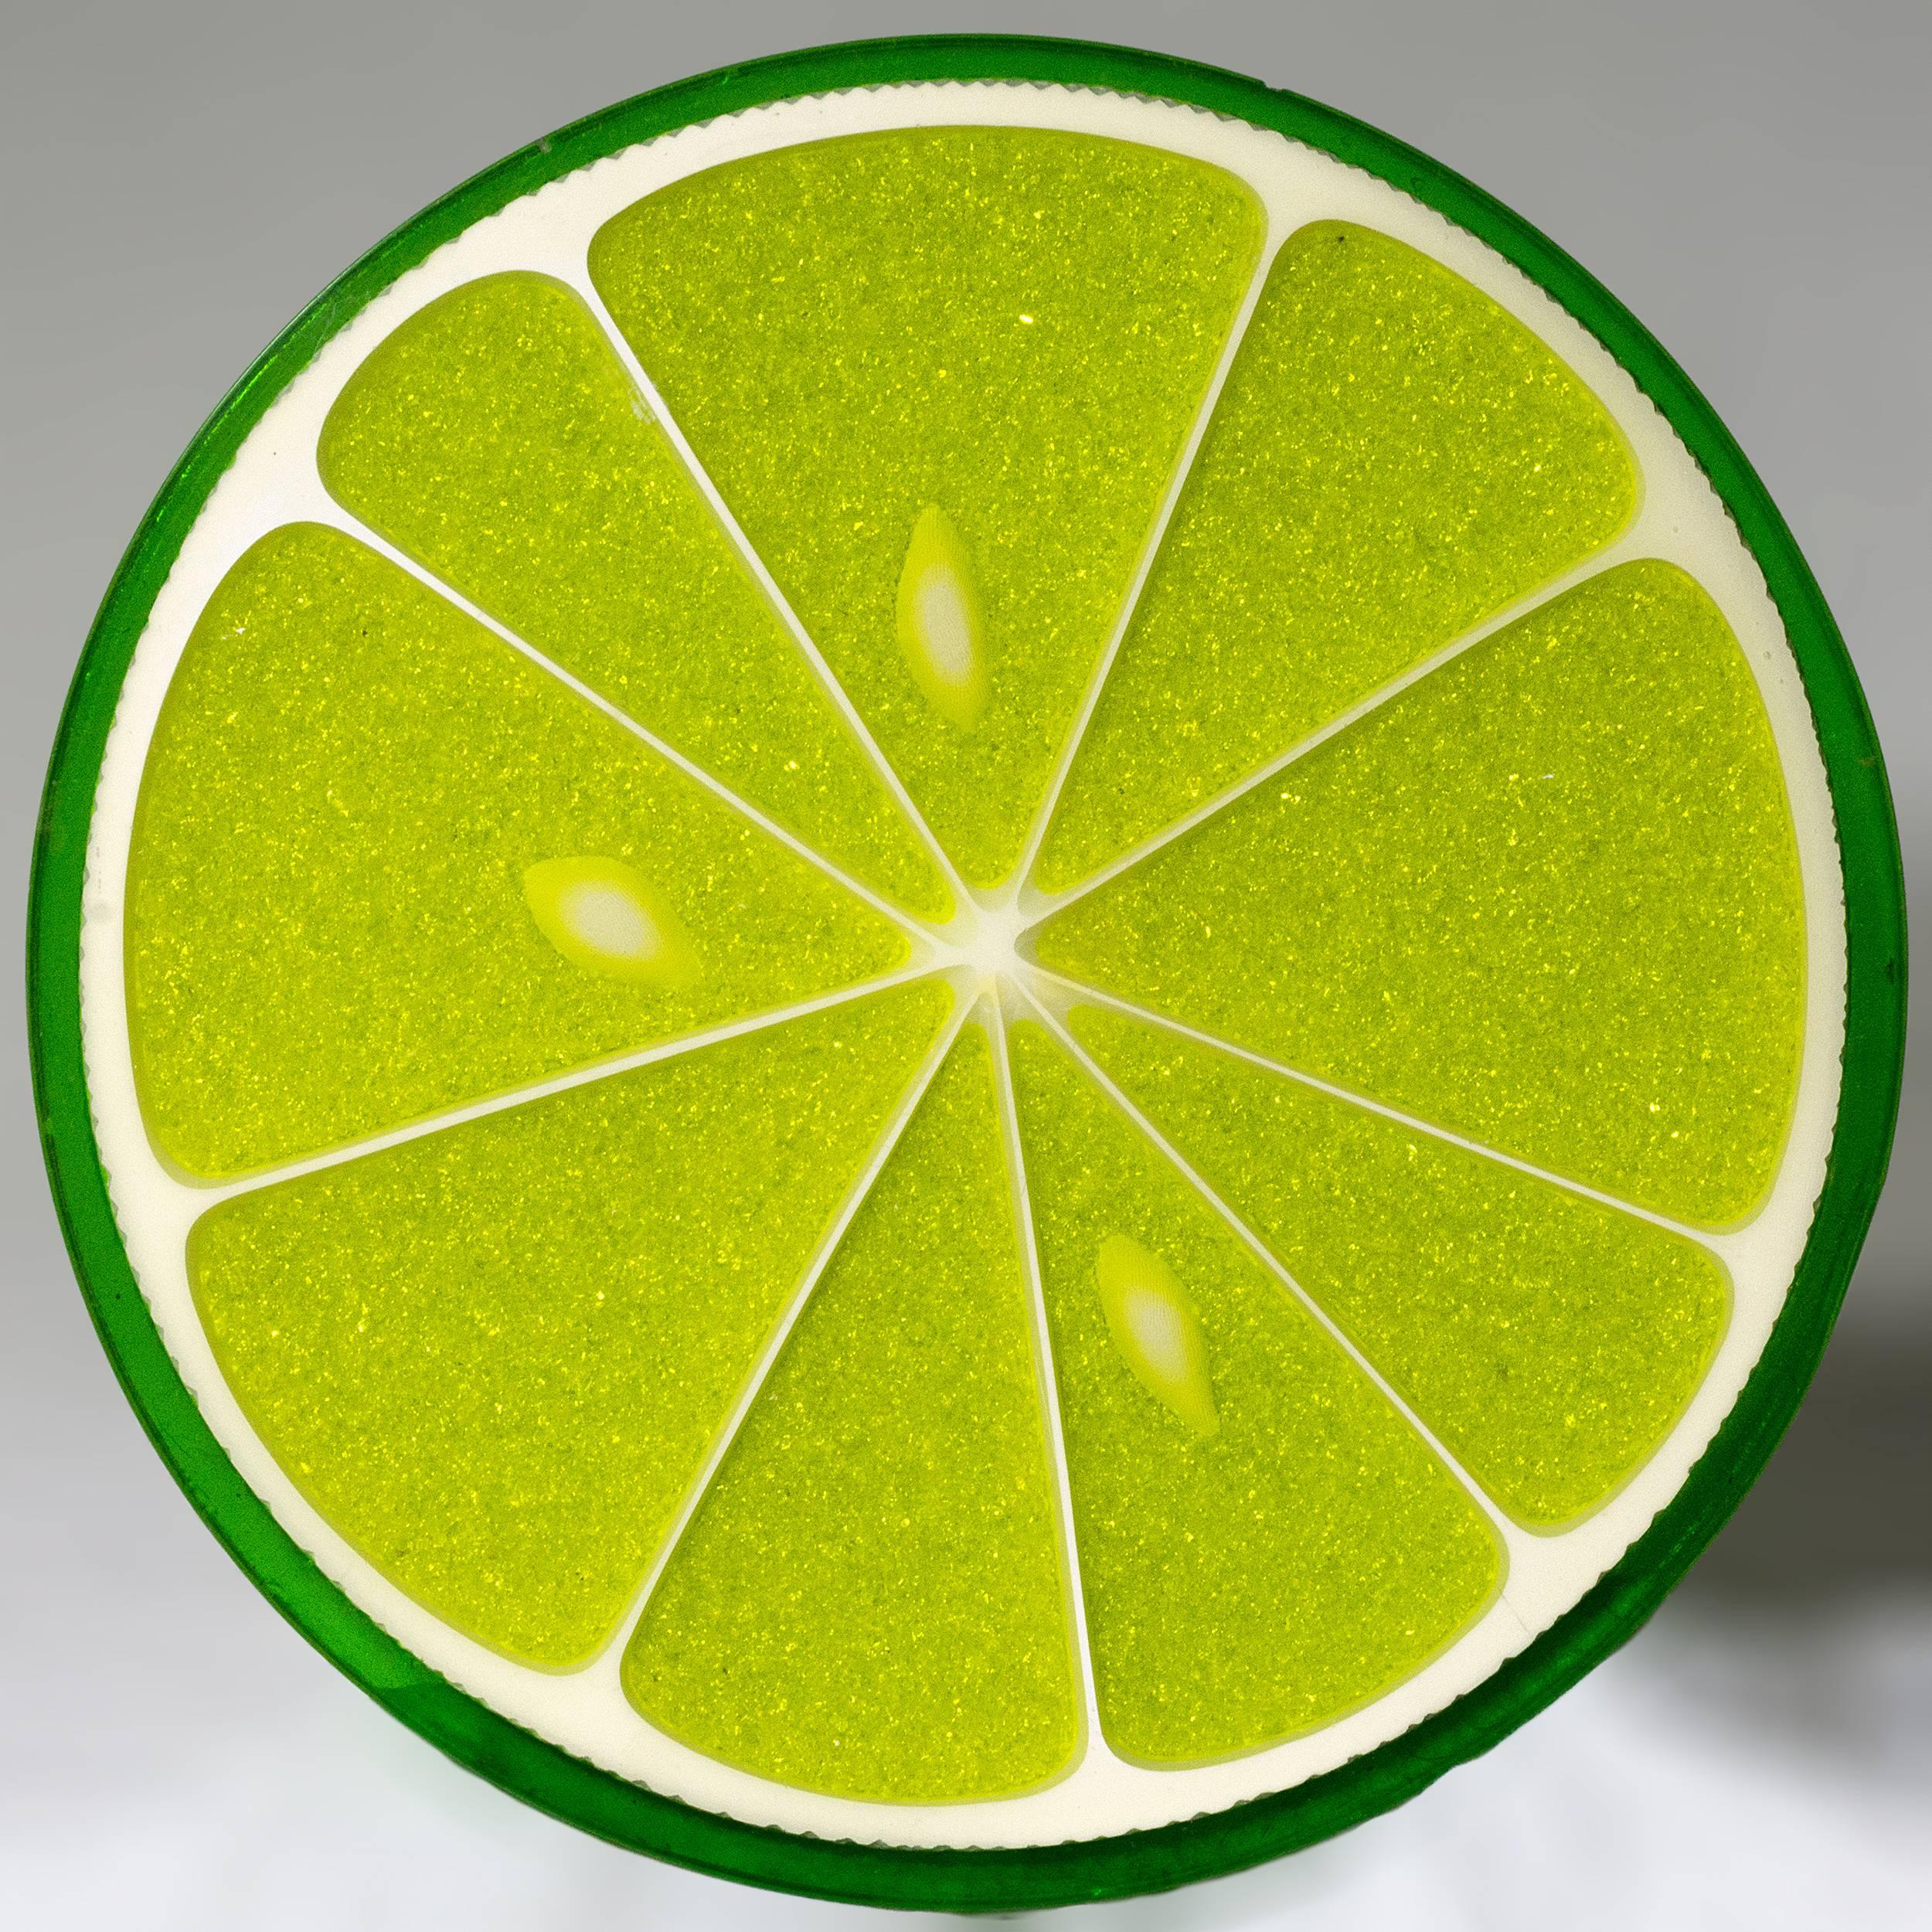 A citrus slice table by Carl Chaffee, circa 1970.
A realistic lime slice in resin with crushed glass
pulp and white ceramic seeds and pith.
The trompe l’oeil top raised on a cluster of 12
rubber tipped chromed steel rods.
    